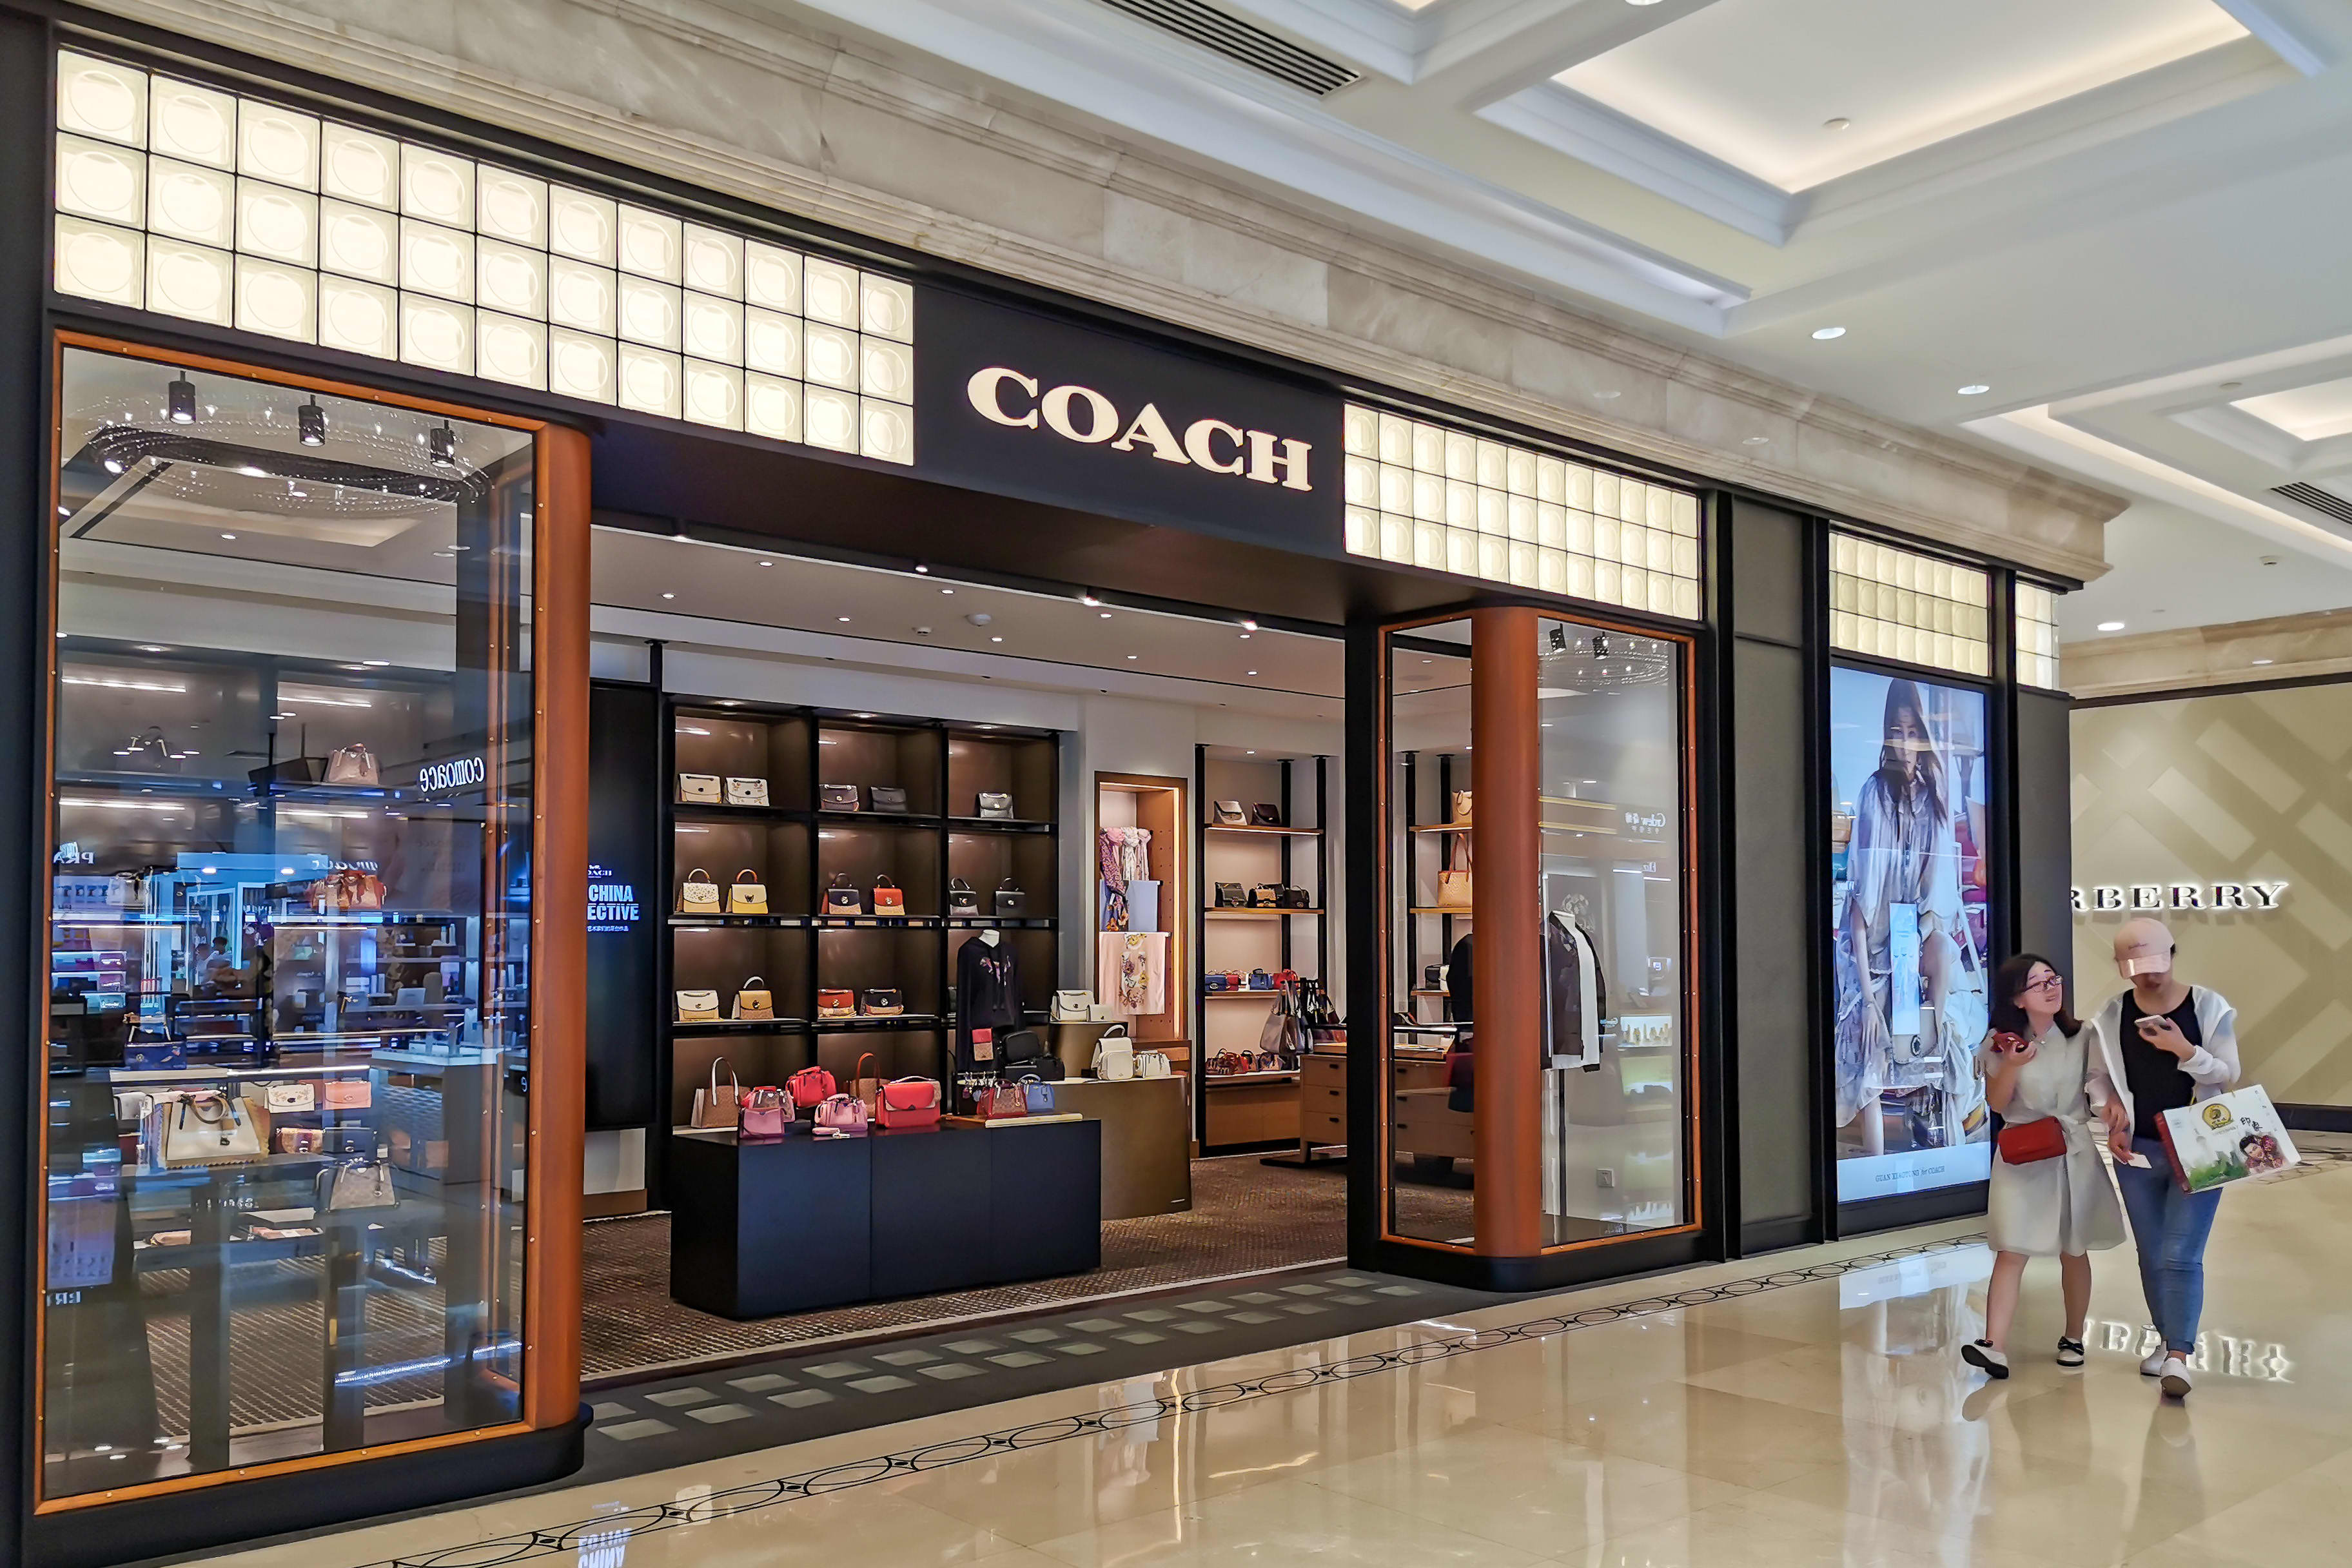 Coach owner Tapestry (TPR) Q3 2021 earnings